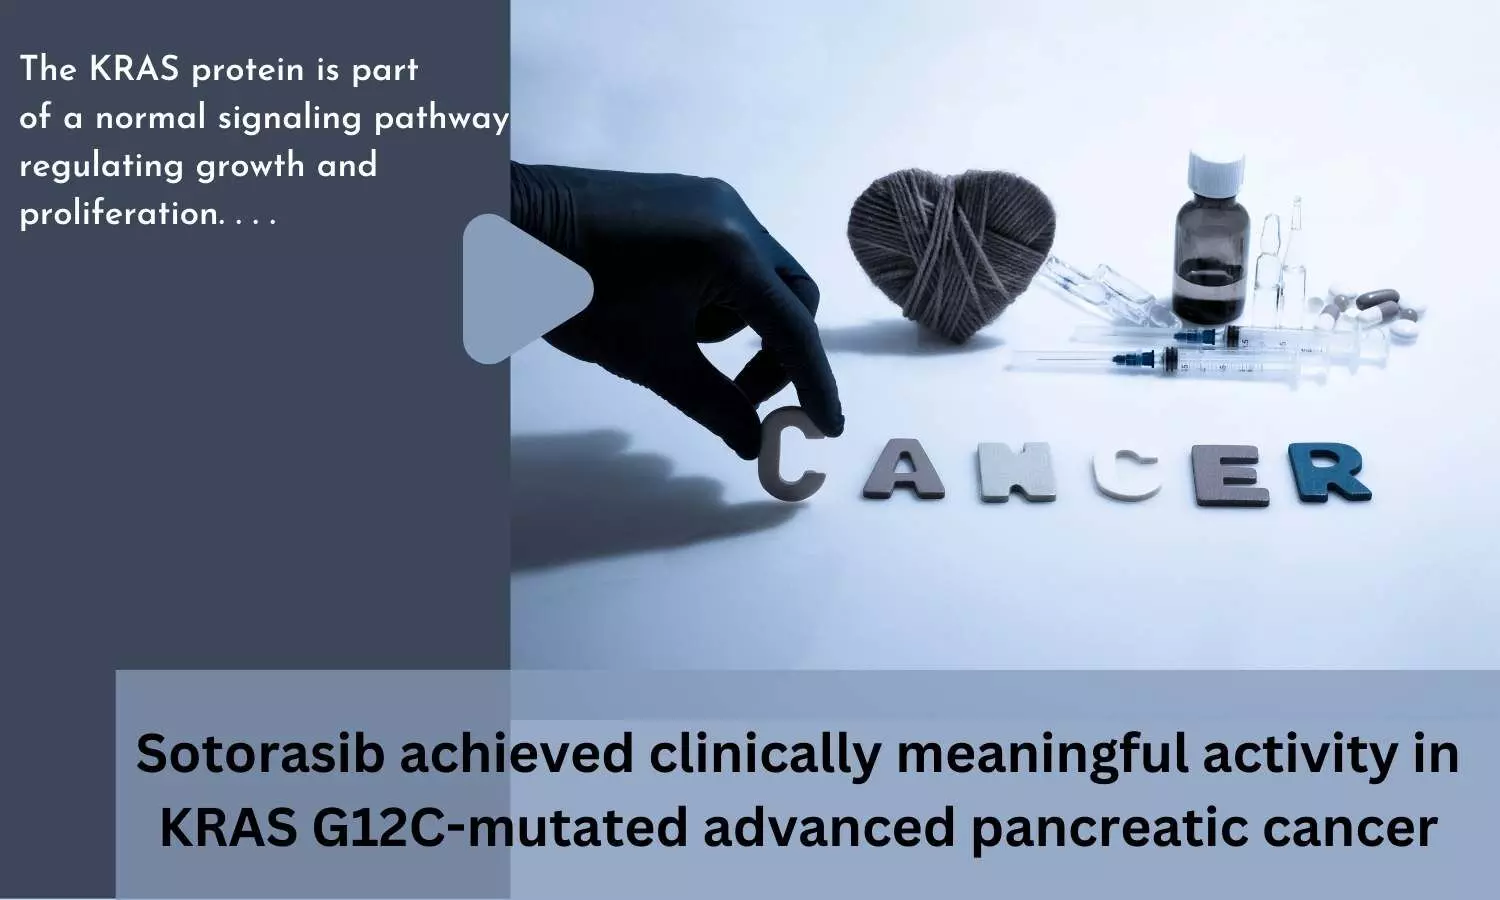 Sotorasib achieved clinically meaningful activity in KRAS G12C-mutated advanced pancreatic cancer